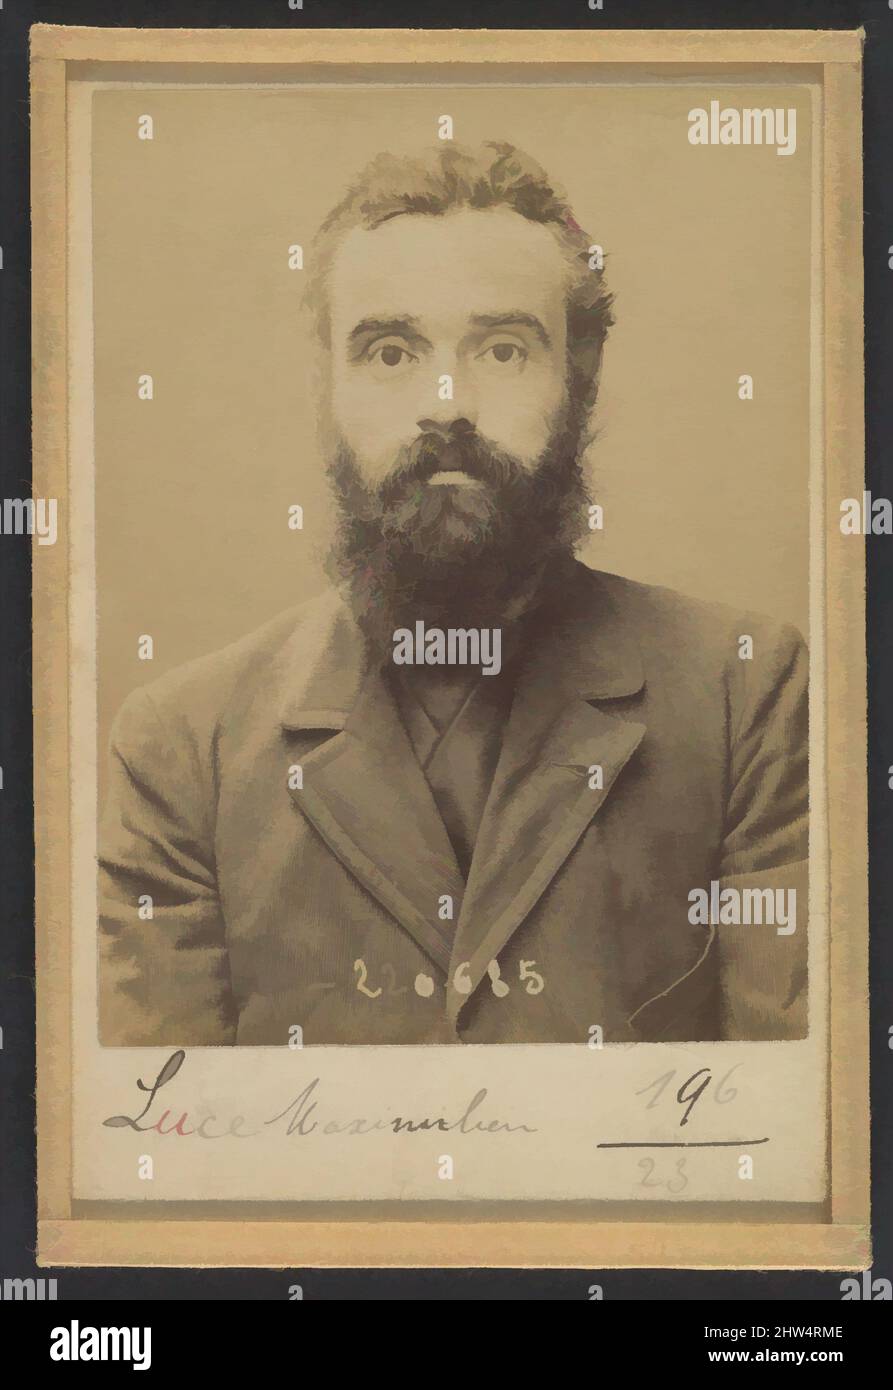 Art inspired by Luce. Maximilien. 36 ans, né le 13/3/58 à Paris VIIe. Artiste-peintre. Anarchiste. 6/7/94., 1894, Albumen silver print from glass negative, 10.5 x 7 x 0.5 cm (4 1/8 x 2 3/4 x 3/16 in.), Photographs, Alphonse Bertillon (French, 1853–1914), Born into a distinguished, Classic works modernized by Artotop with a splash of modernity. Shapes, color and value, eye-catching visual impact on art. Emotions through freedom of artworks in a contemporary way. A timeless message pursuing a wildly creative new direction. Artists turning to the digital medium and creating the Artotop NFT Stock Photo